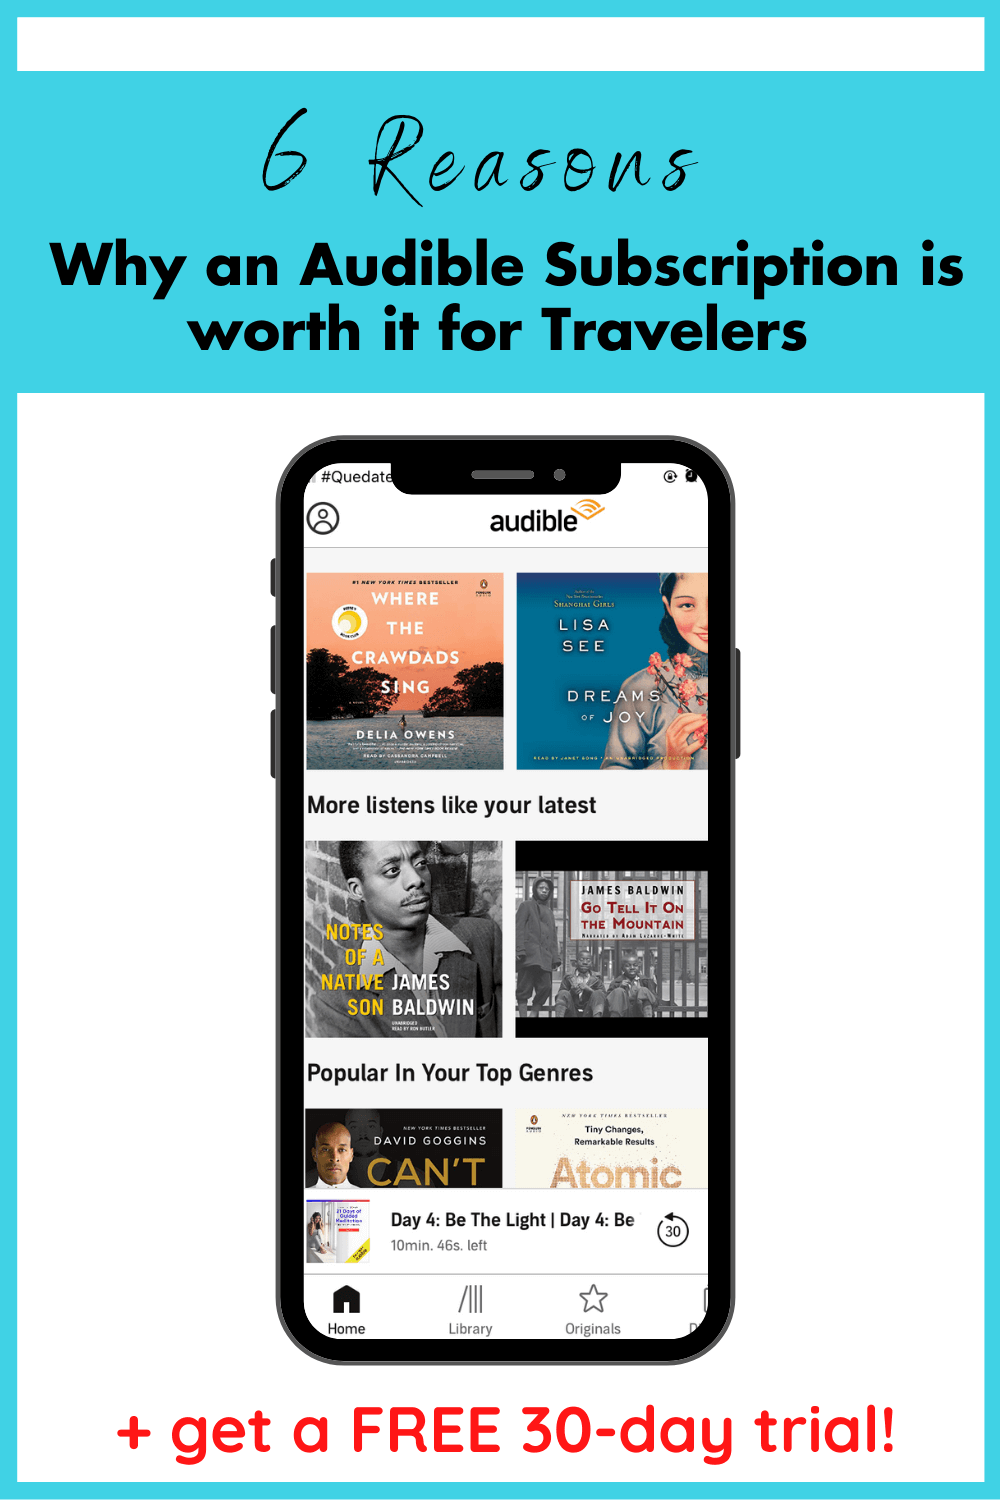 Audible FREE 30-day trial, 5 Reasons Why an Audible Subscription is worth it for Travelers, FREE audible subscription